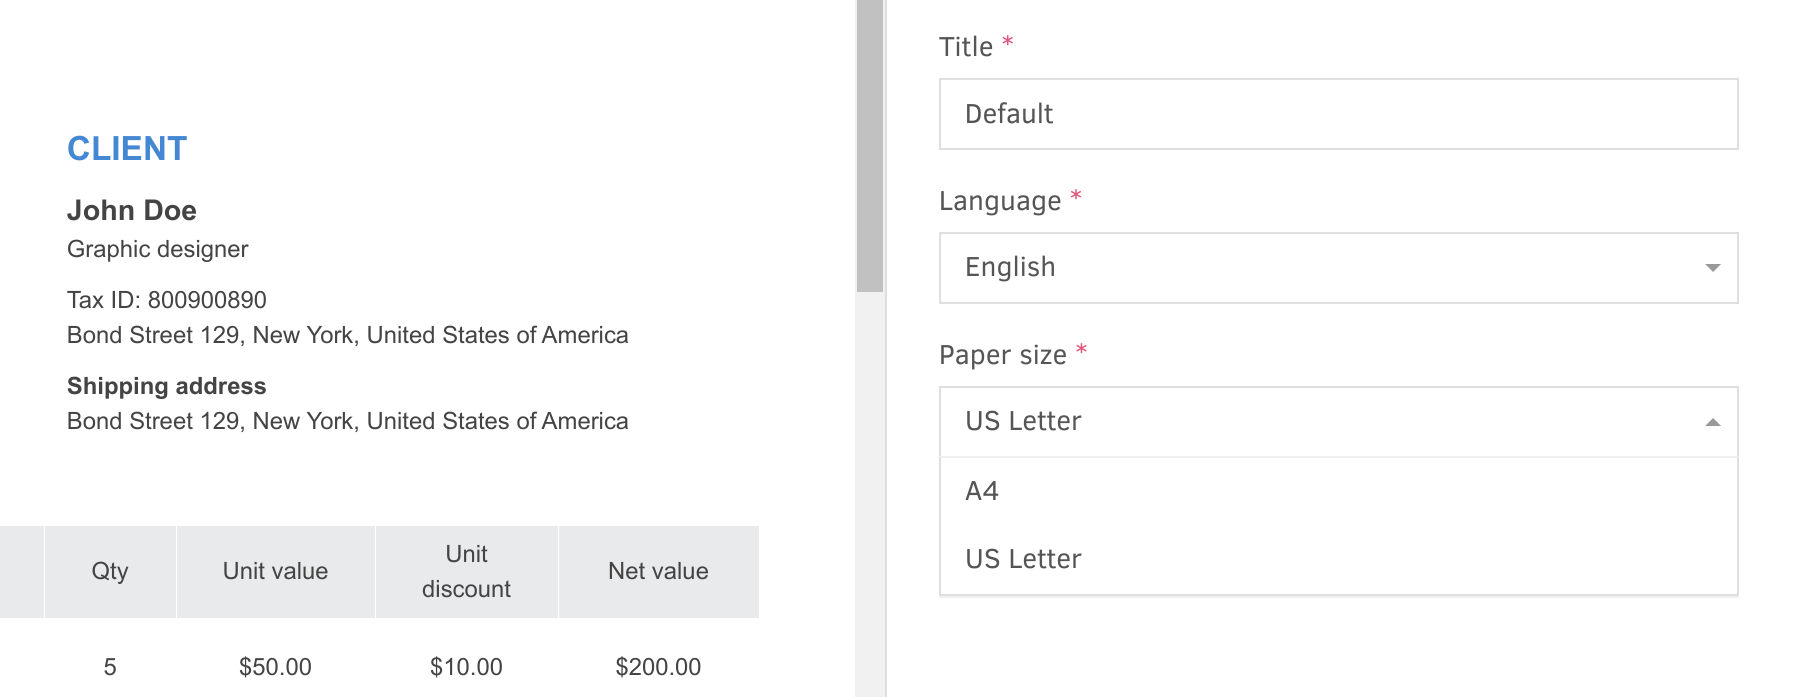 Choose between US letter & A4 invoice paper sizes